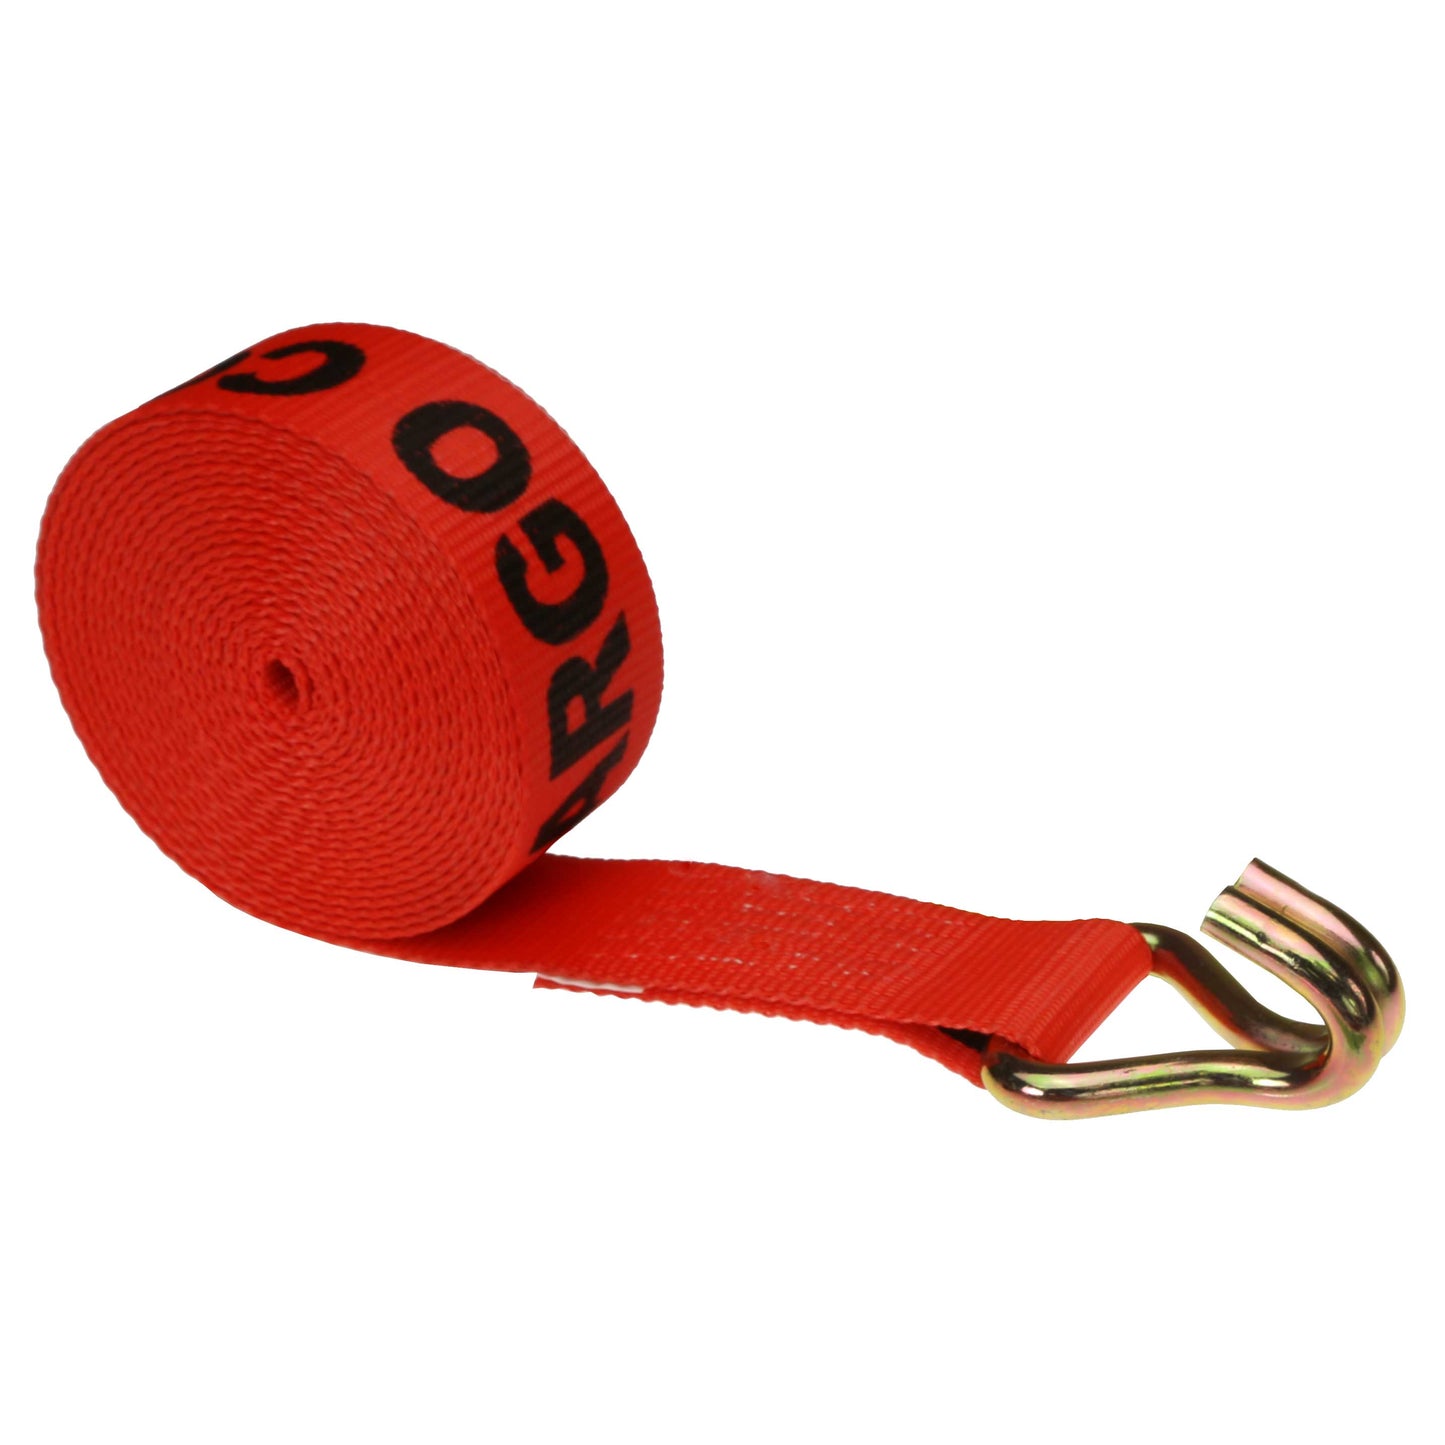 2 inch x 30 foot Red Winch Strap with Wire Hook